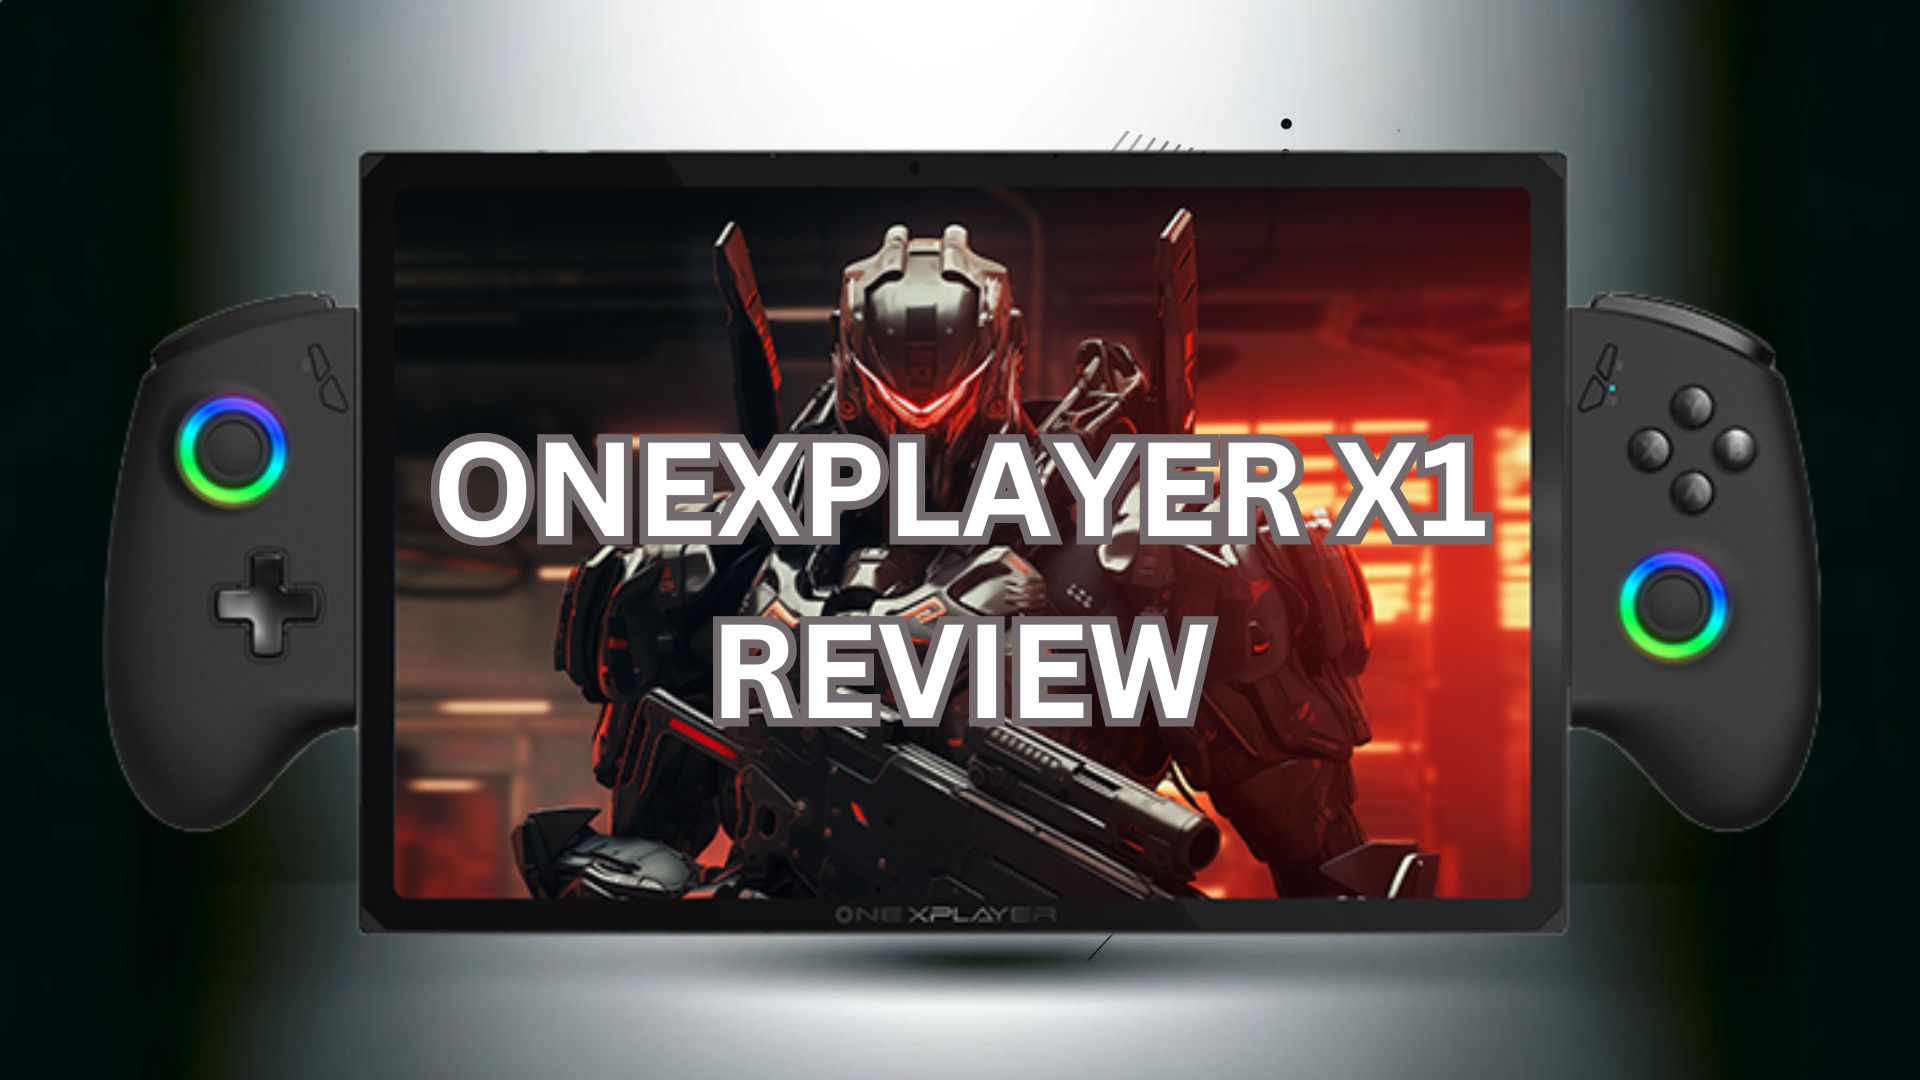 ONEXPLAYER X1 Review with video